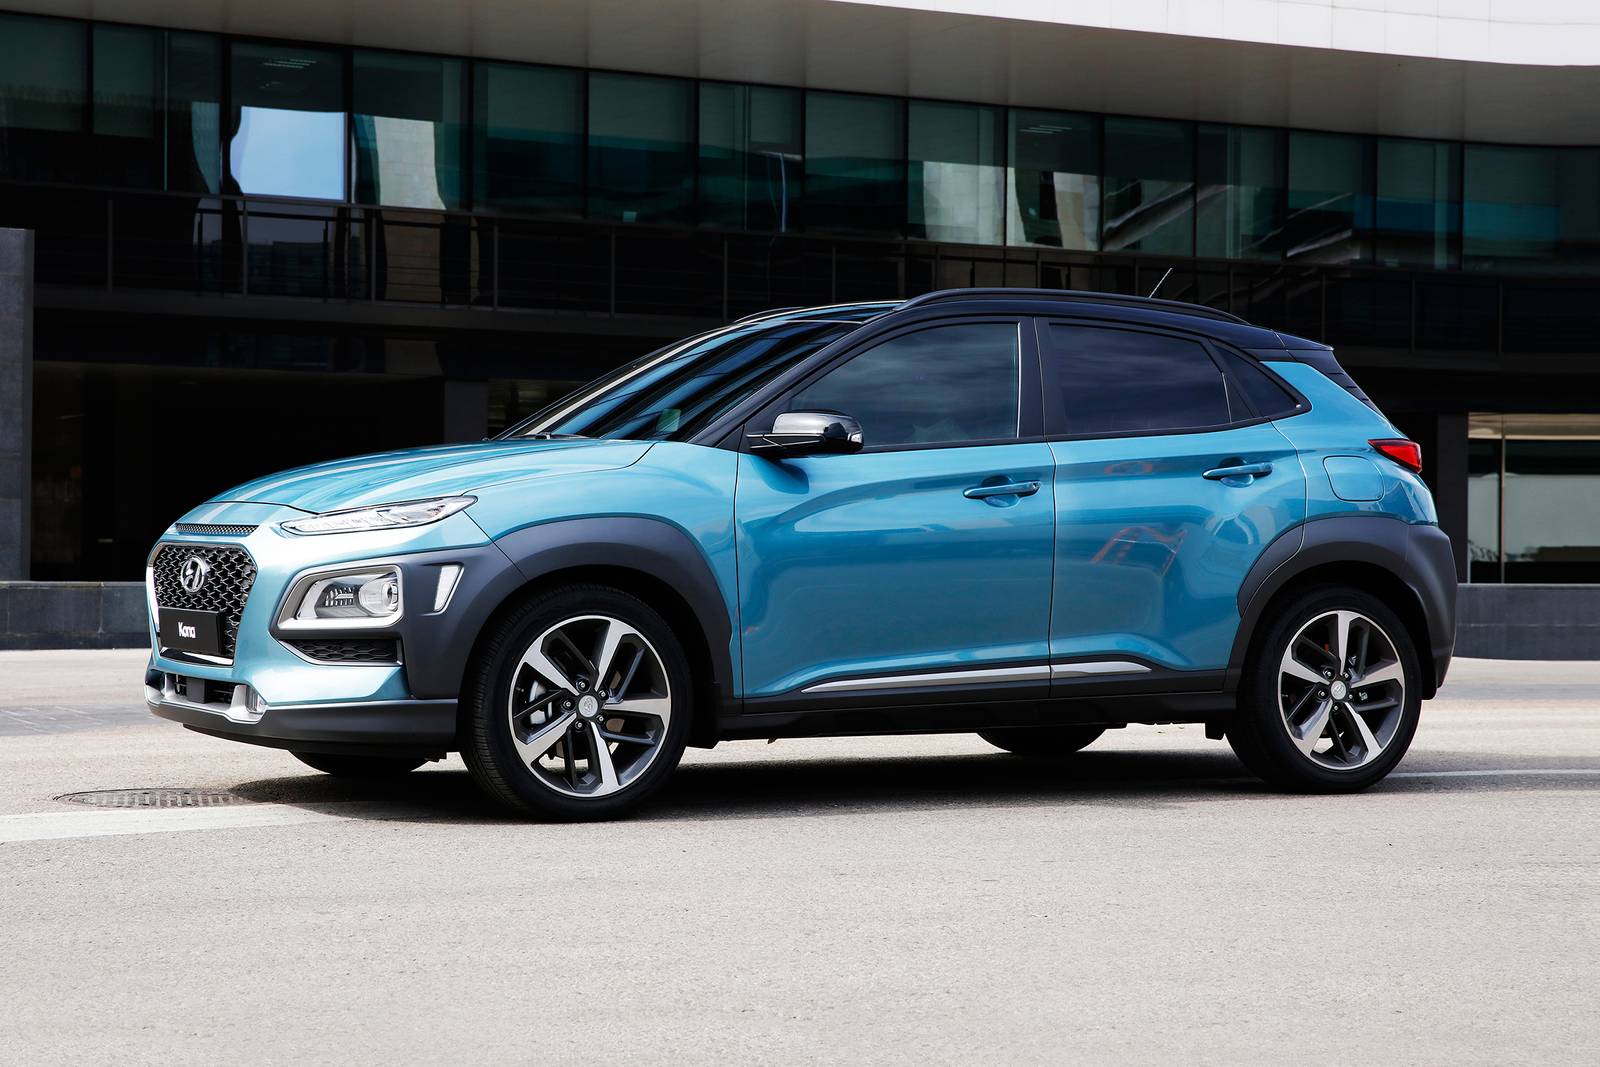 20 Hyundai Kona Prices, Reviews, and Pictures   Edmunds